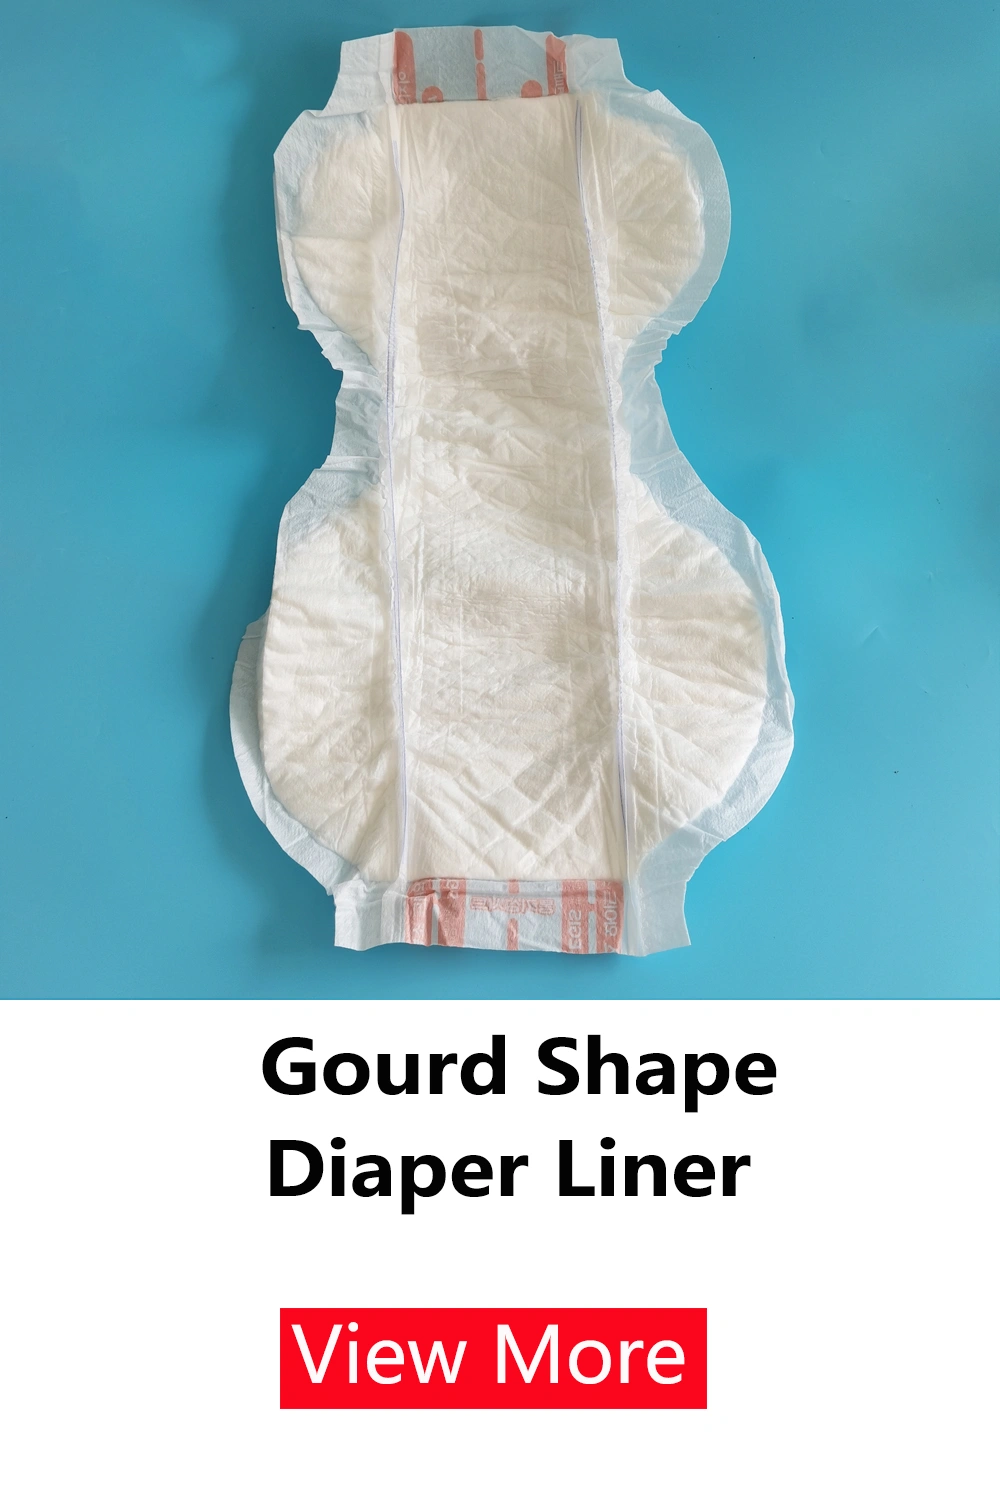 Bed pad related product 8 type diaper liner